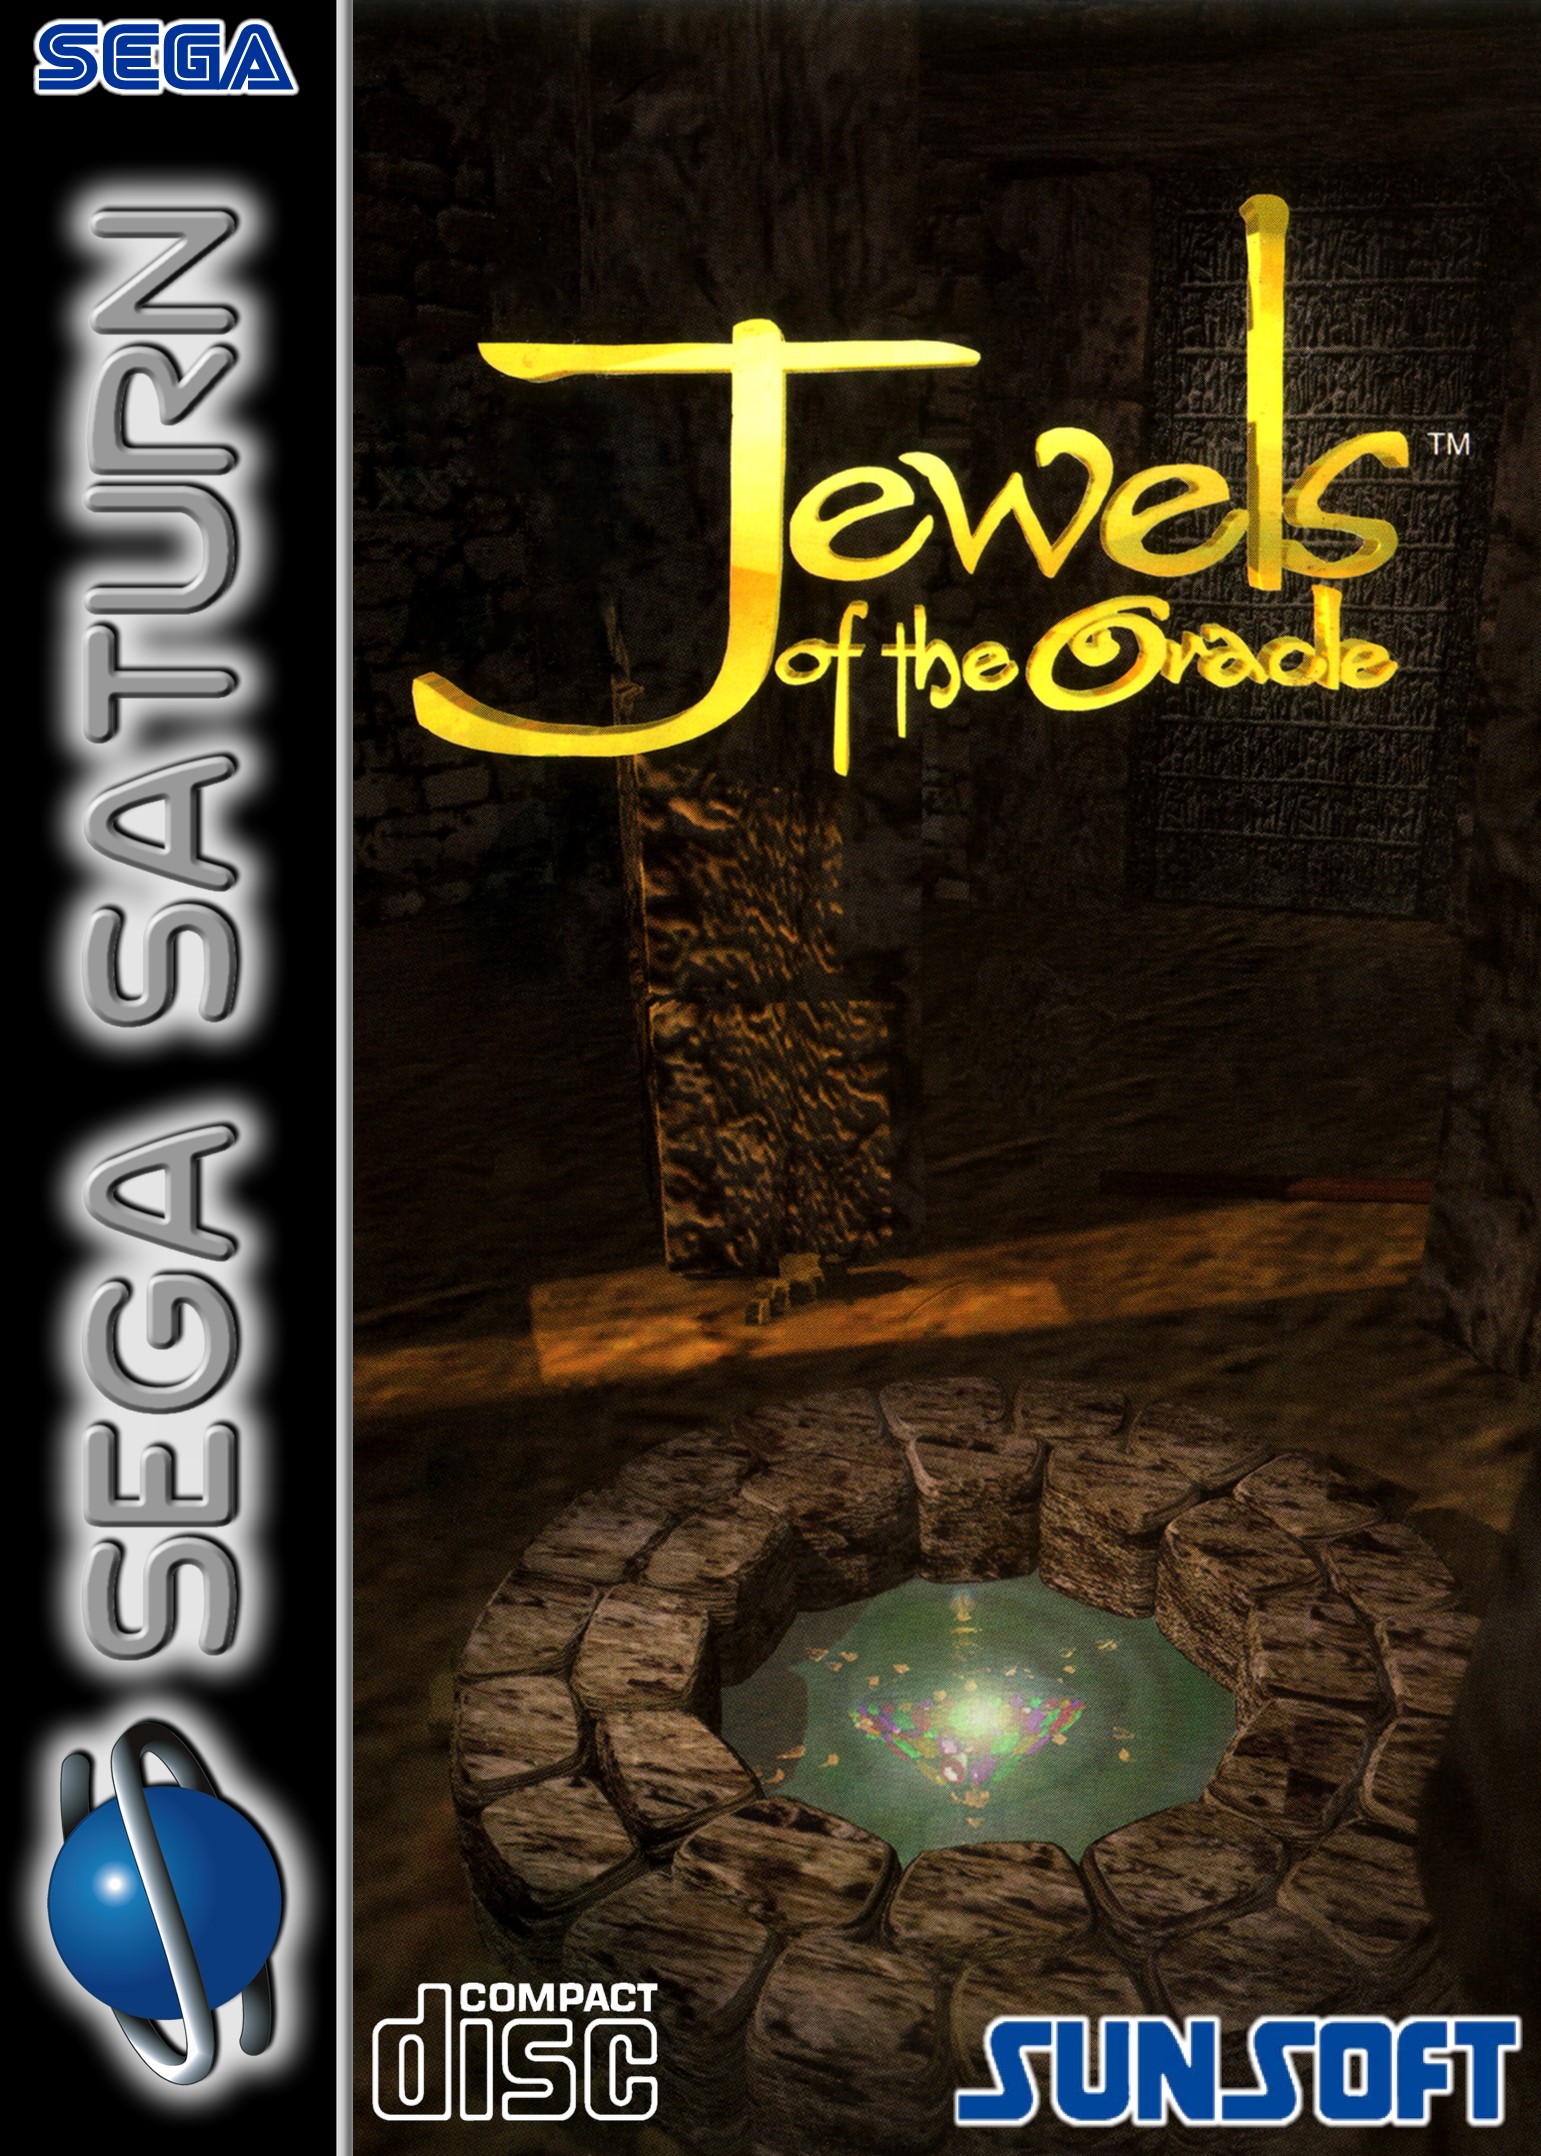 'Jewels of the Oracle'